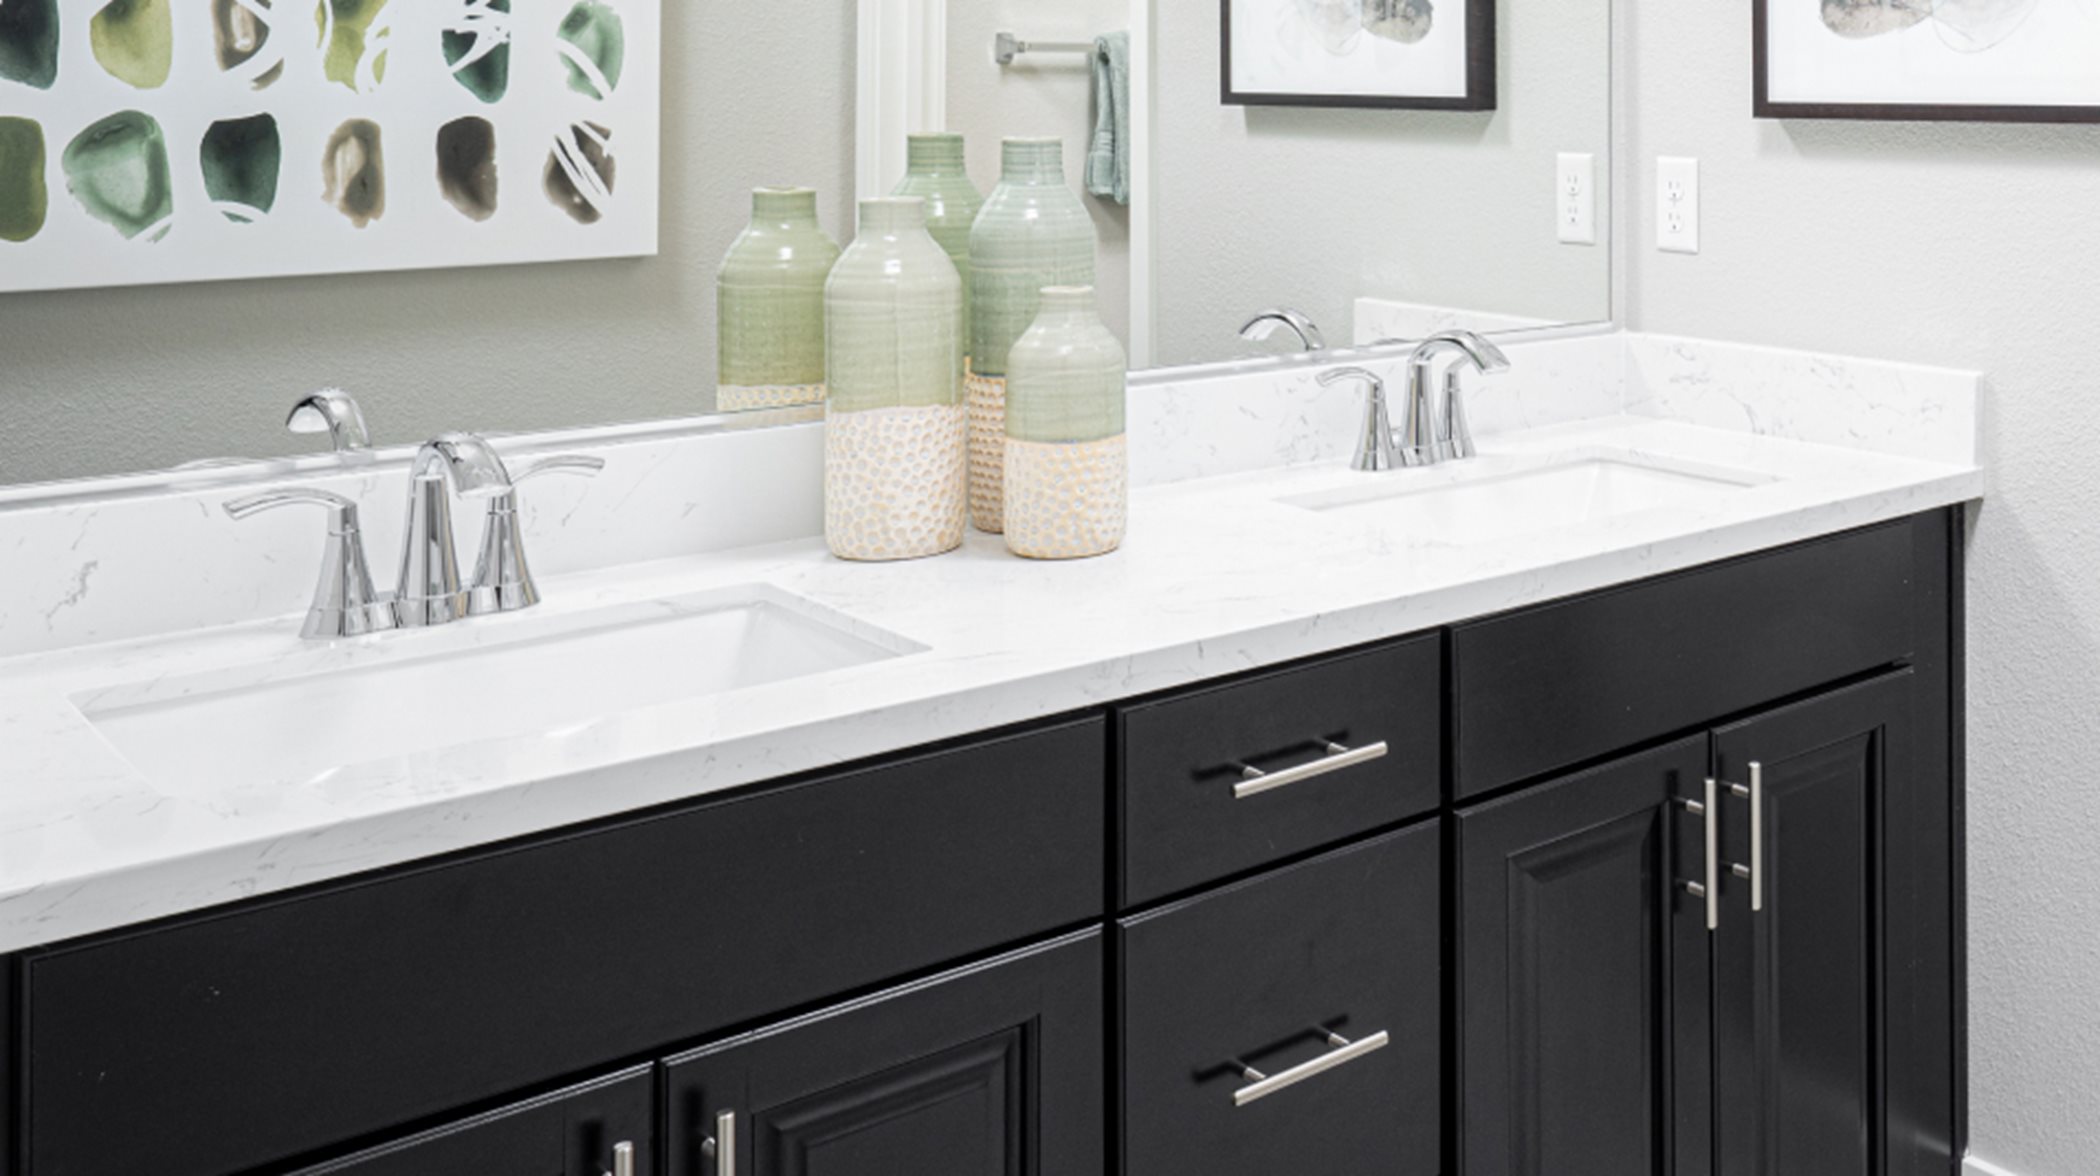 Dual sinks in the owner’s suite bathroom promotes a streamlined morning routine